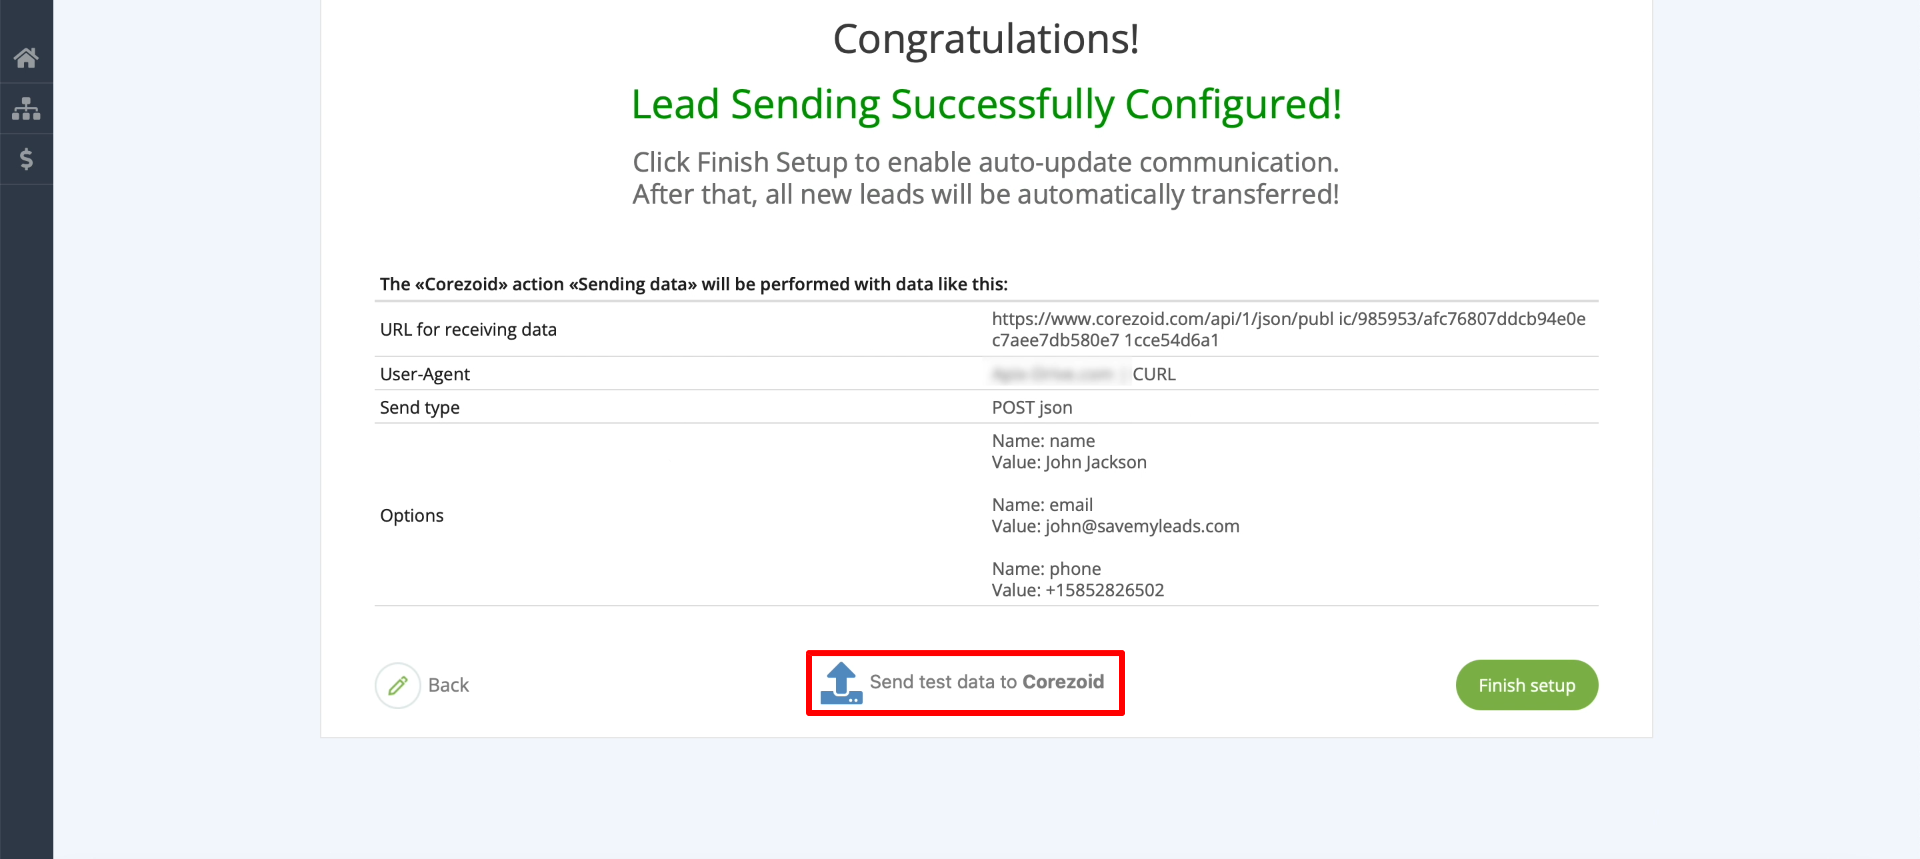 How to set up uploading new leads from a Facebook ad account in Corezoid | Sending test data to Corezoid